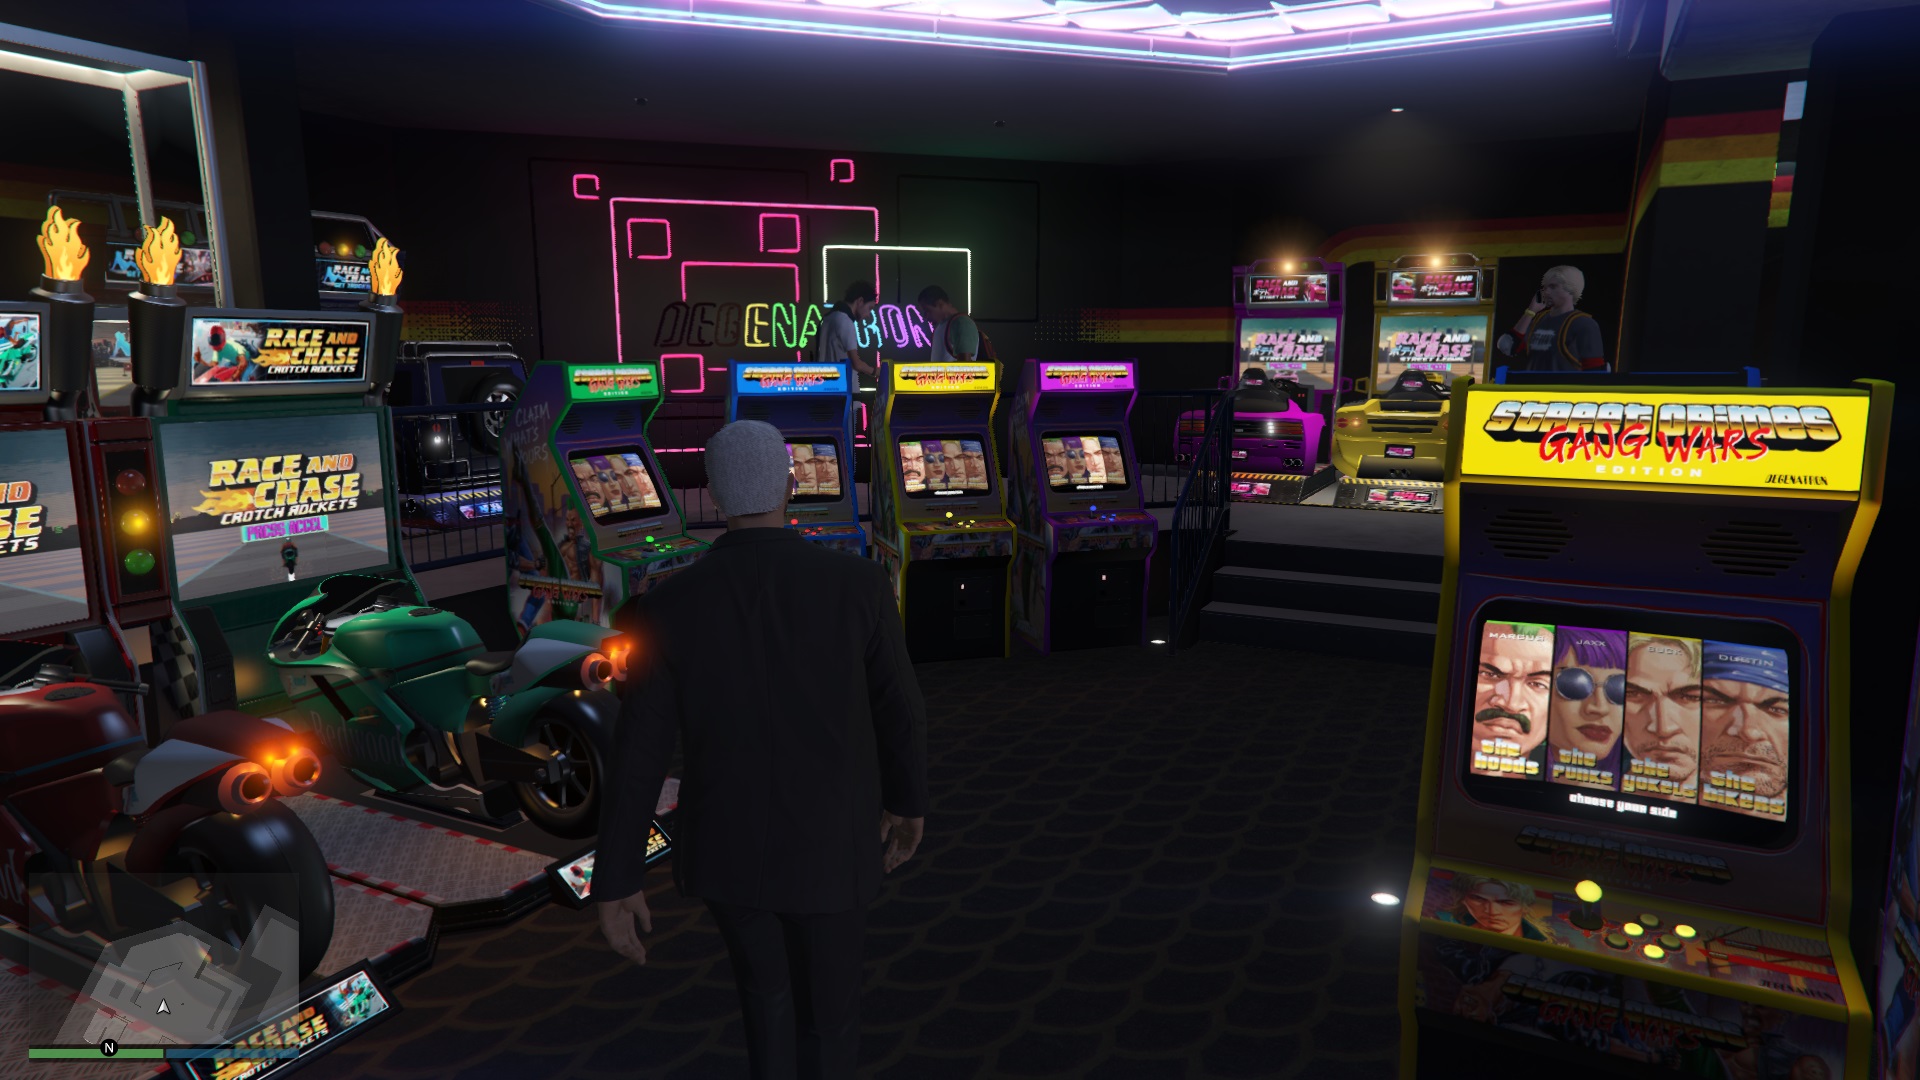 How to Buy An Arcade in GTA 5